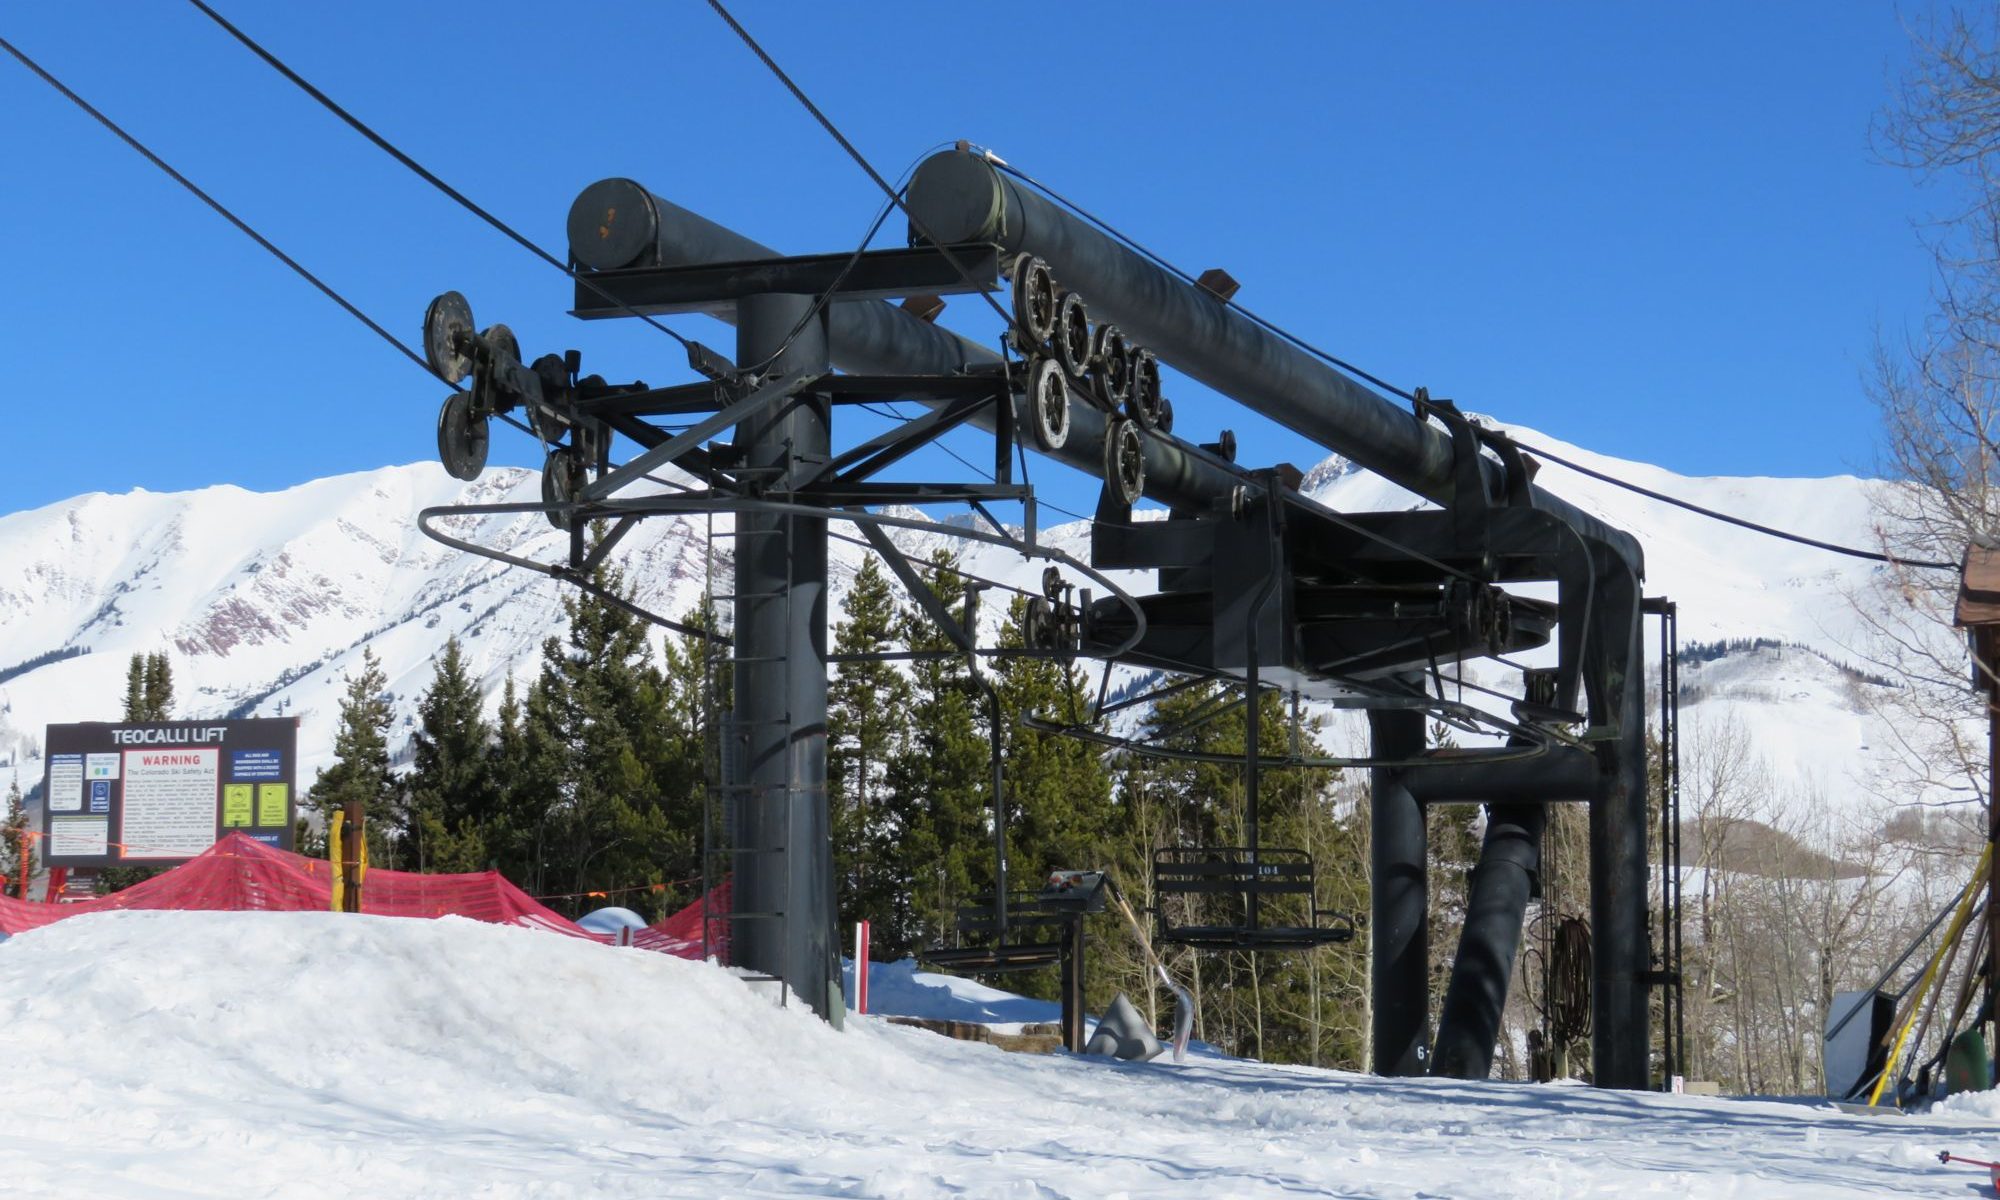 Teocalli lift - Photo: Peter Landsmen- KBUT radio. Crested Butte’s Teocalli Lift Replacement Approved by U.S. Forest Service.